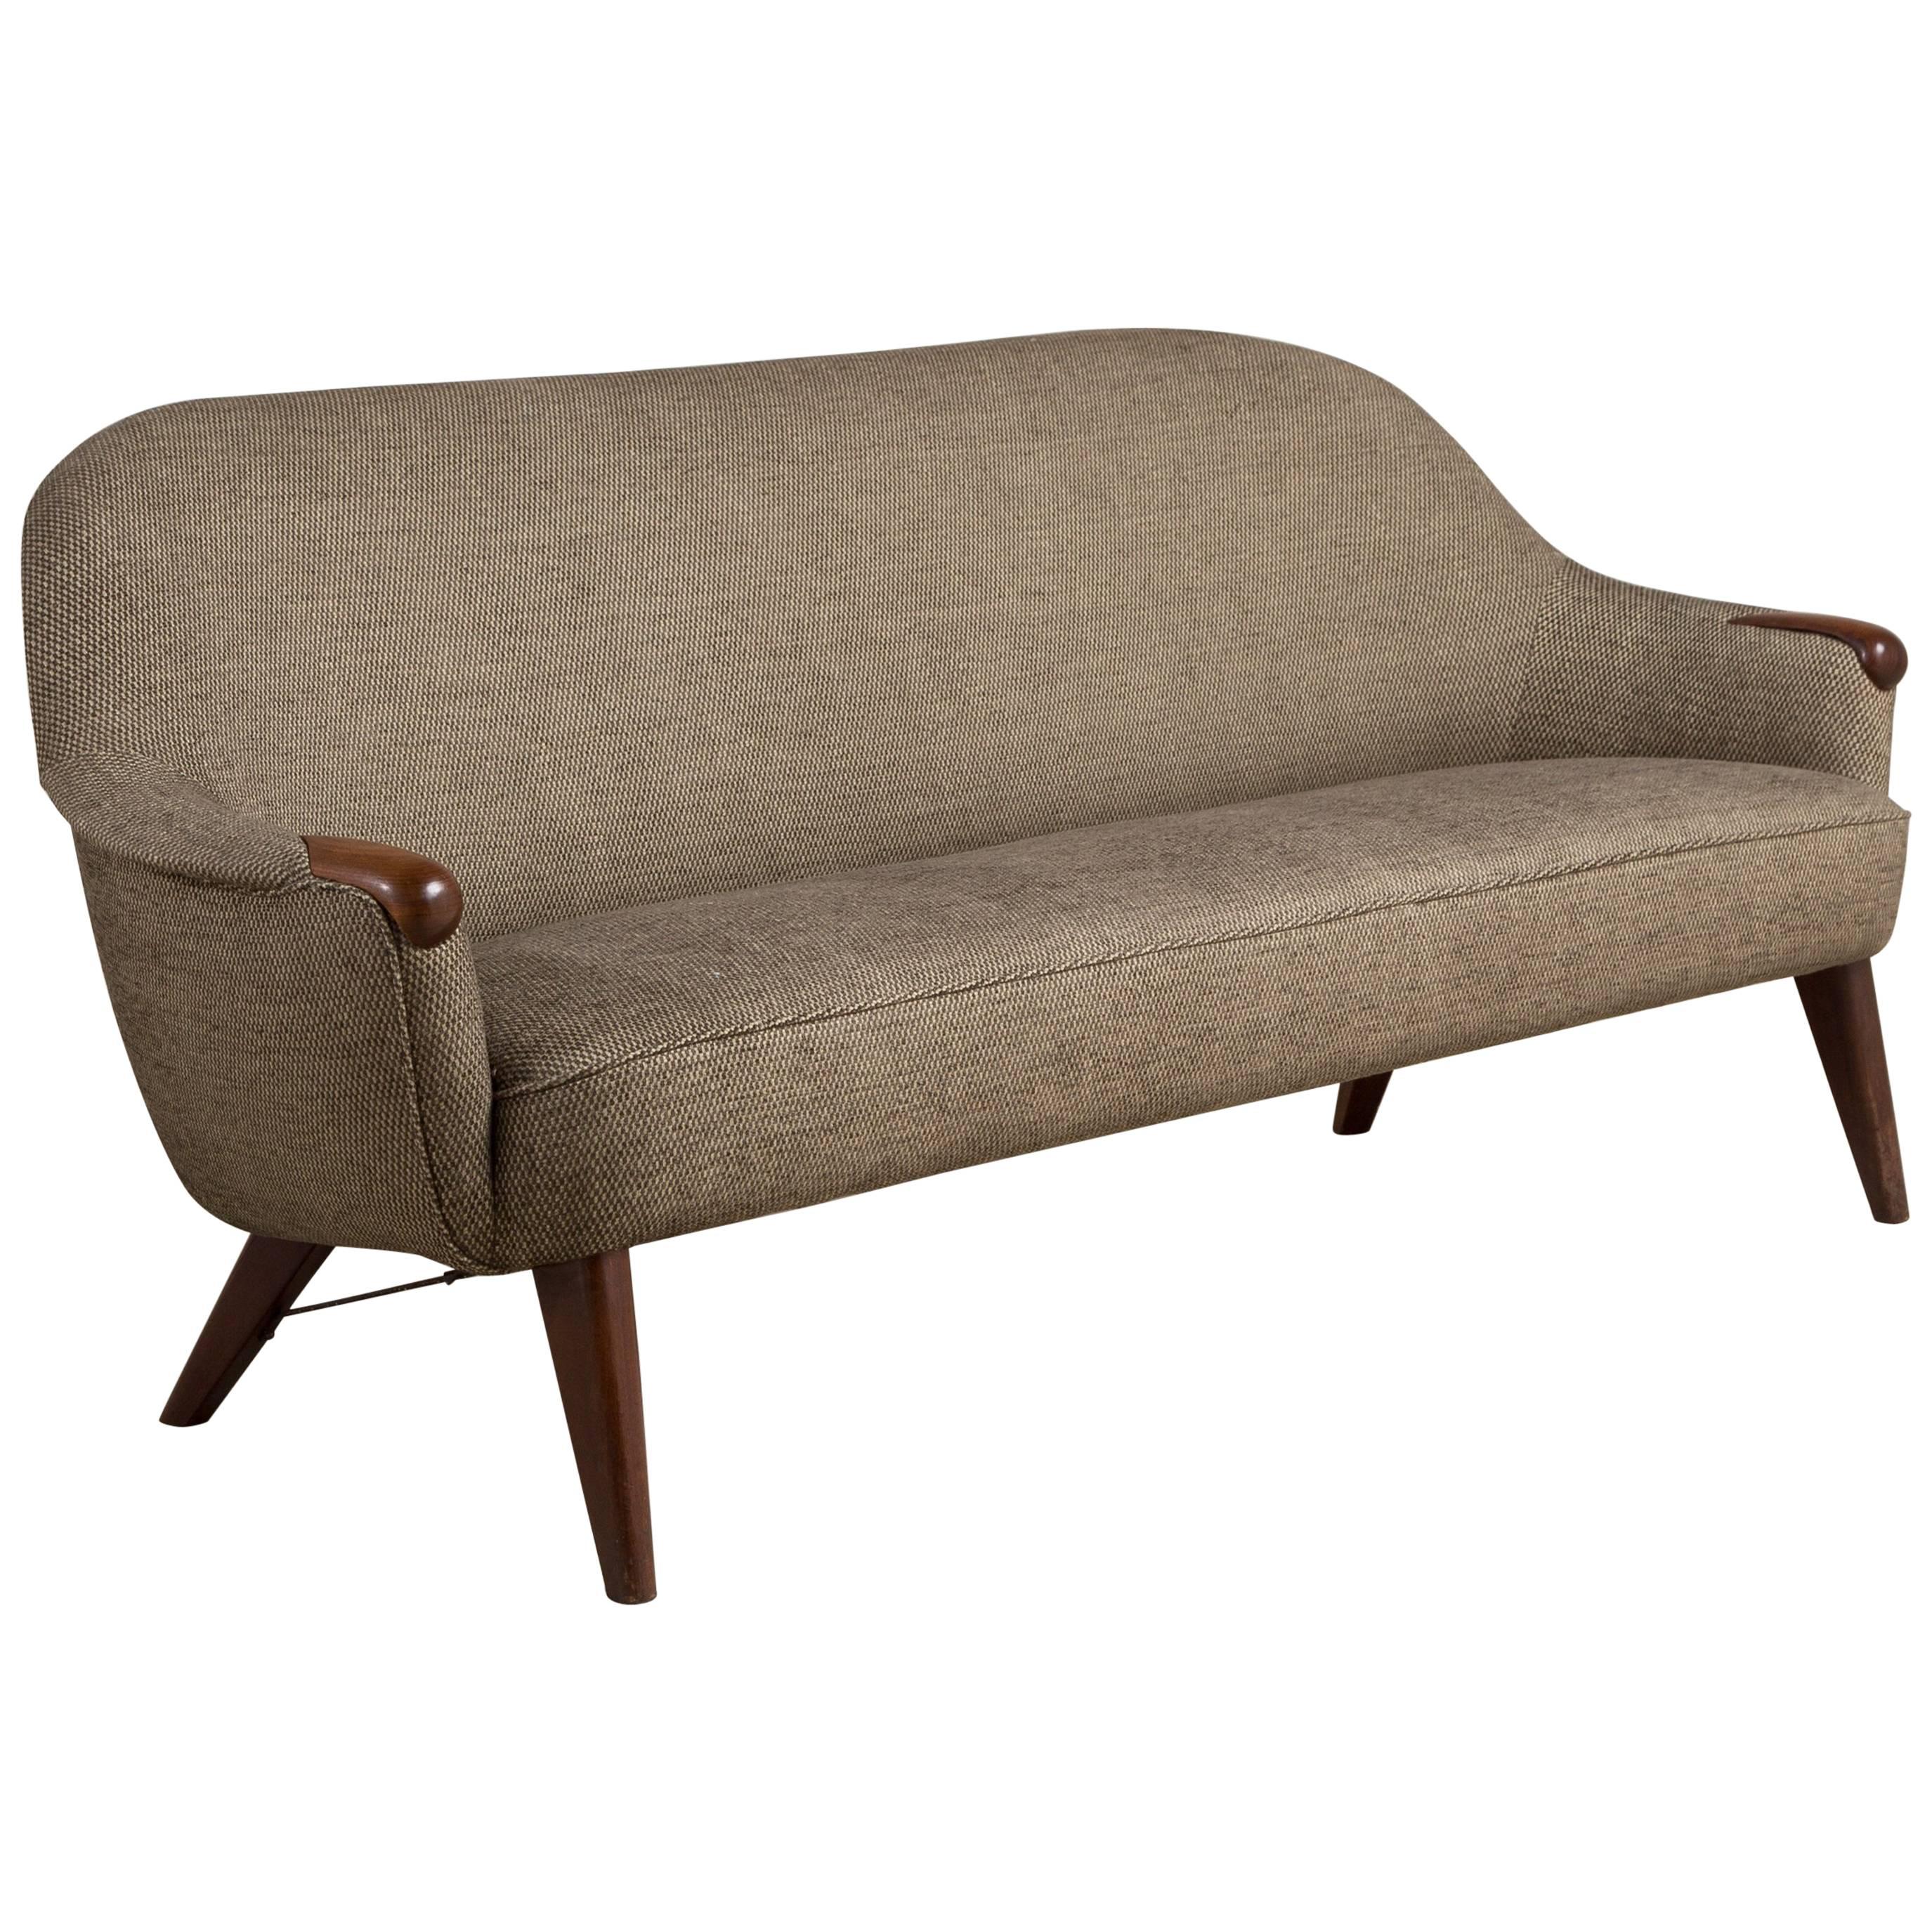 Chic Danish Upholstered Sofa by Kurt Ostervig, 1960s For Sale